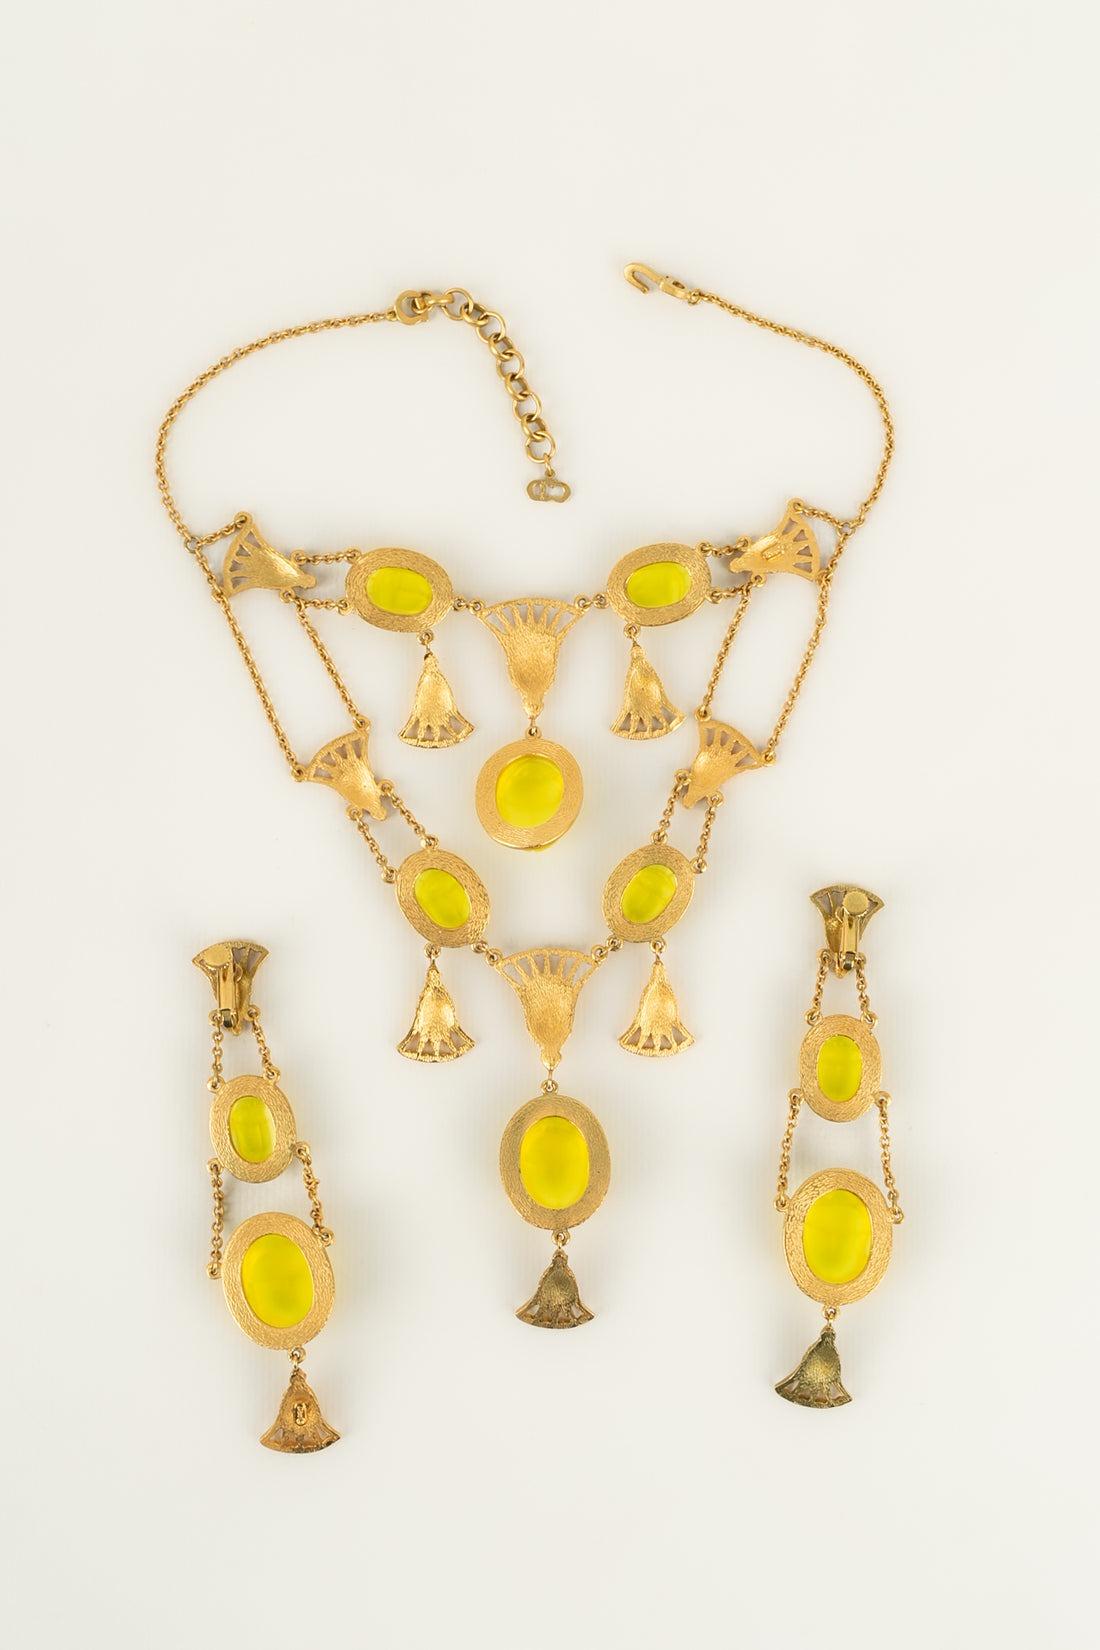 Dior - Jewelry composed of a necklace and earrings in gold-plated metal and beetles in yellow resin. Spring-Summer 2004 Collection.

Additional information:
Condition: Very good condition
Dimensions: Necklace length: from 34 cm to 39 cm 
Earrings